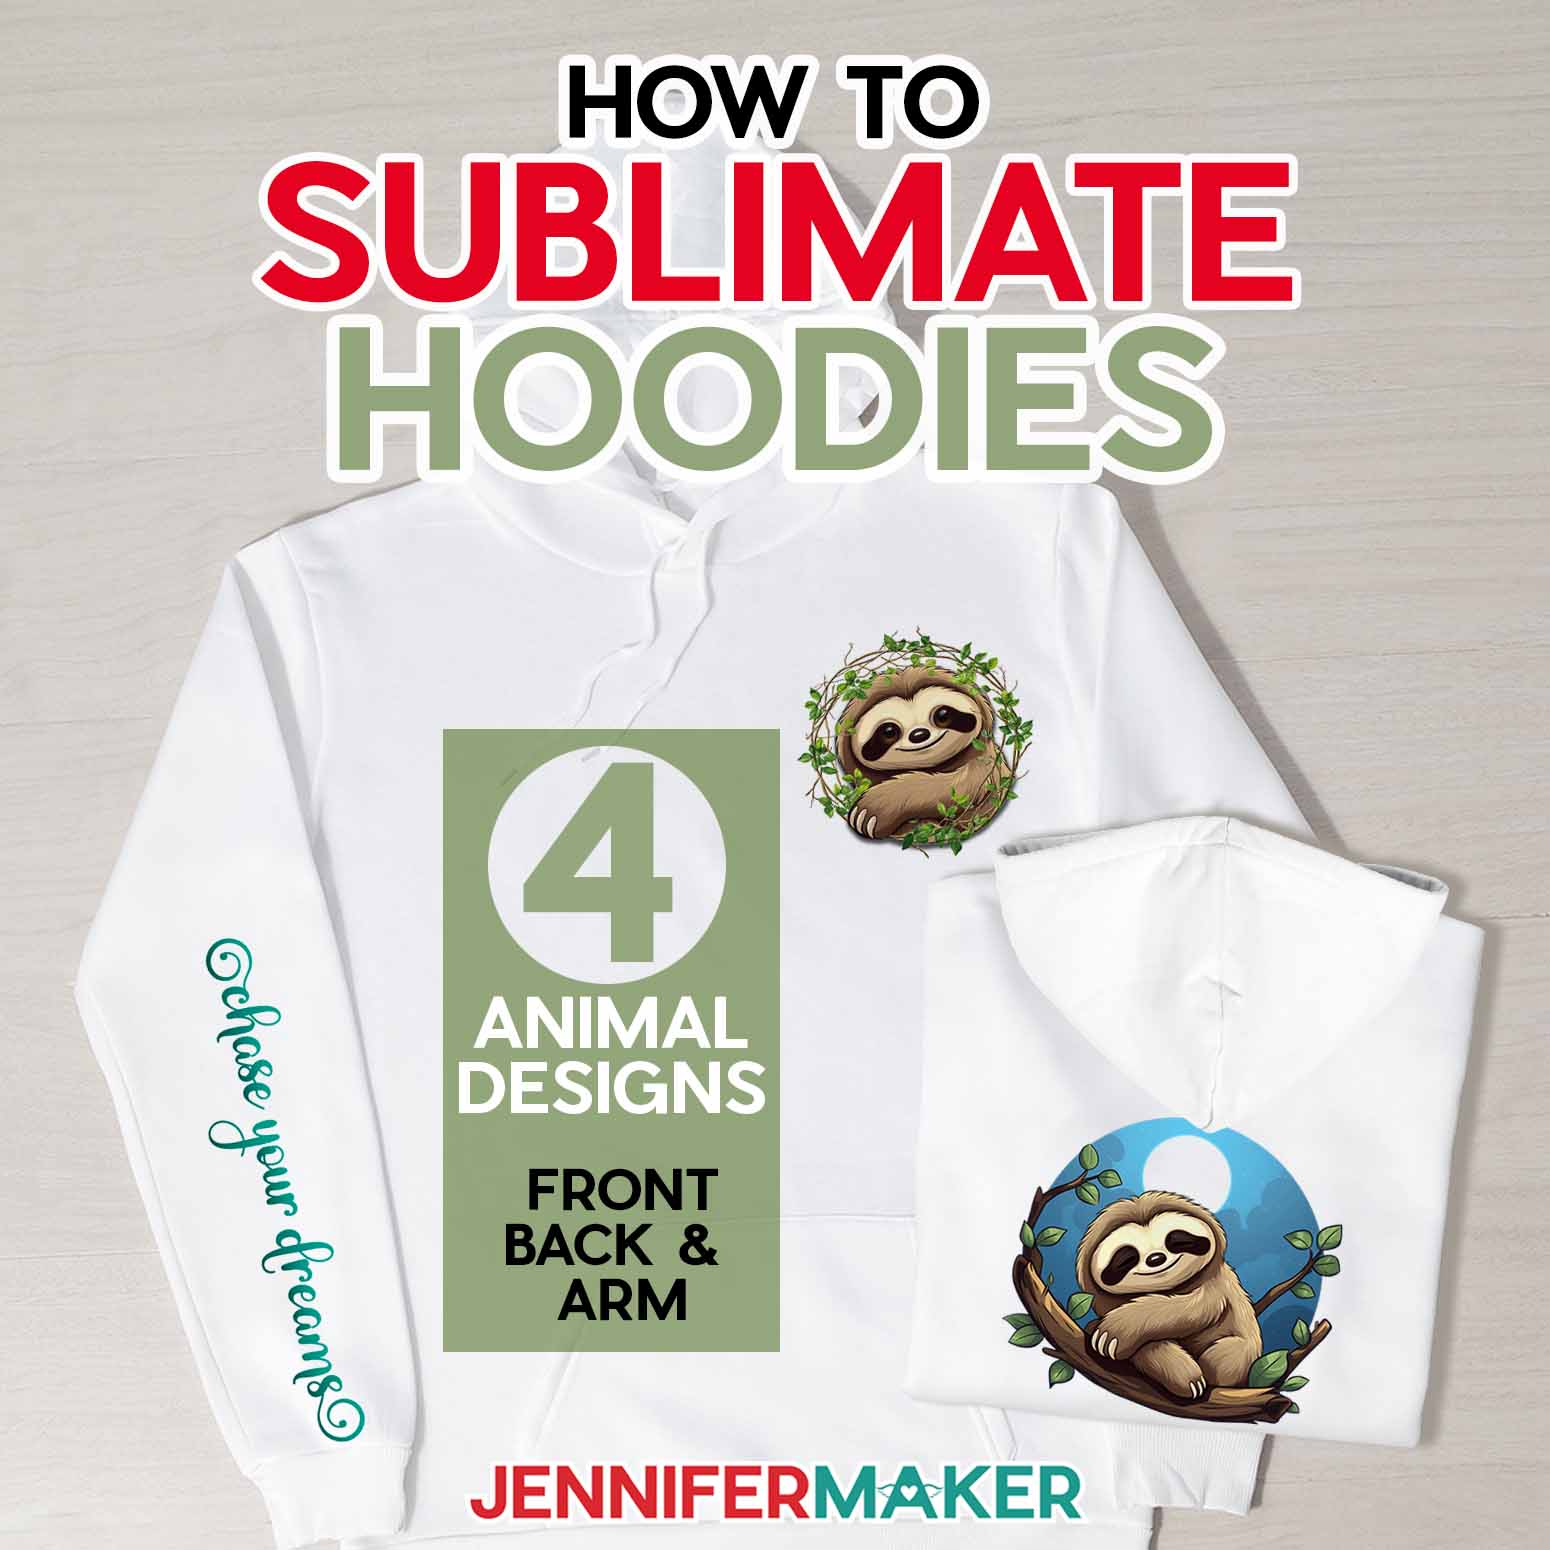 How To Sublimate Hoodies: Back, Chest, And Sleeve!